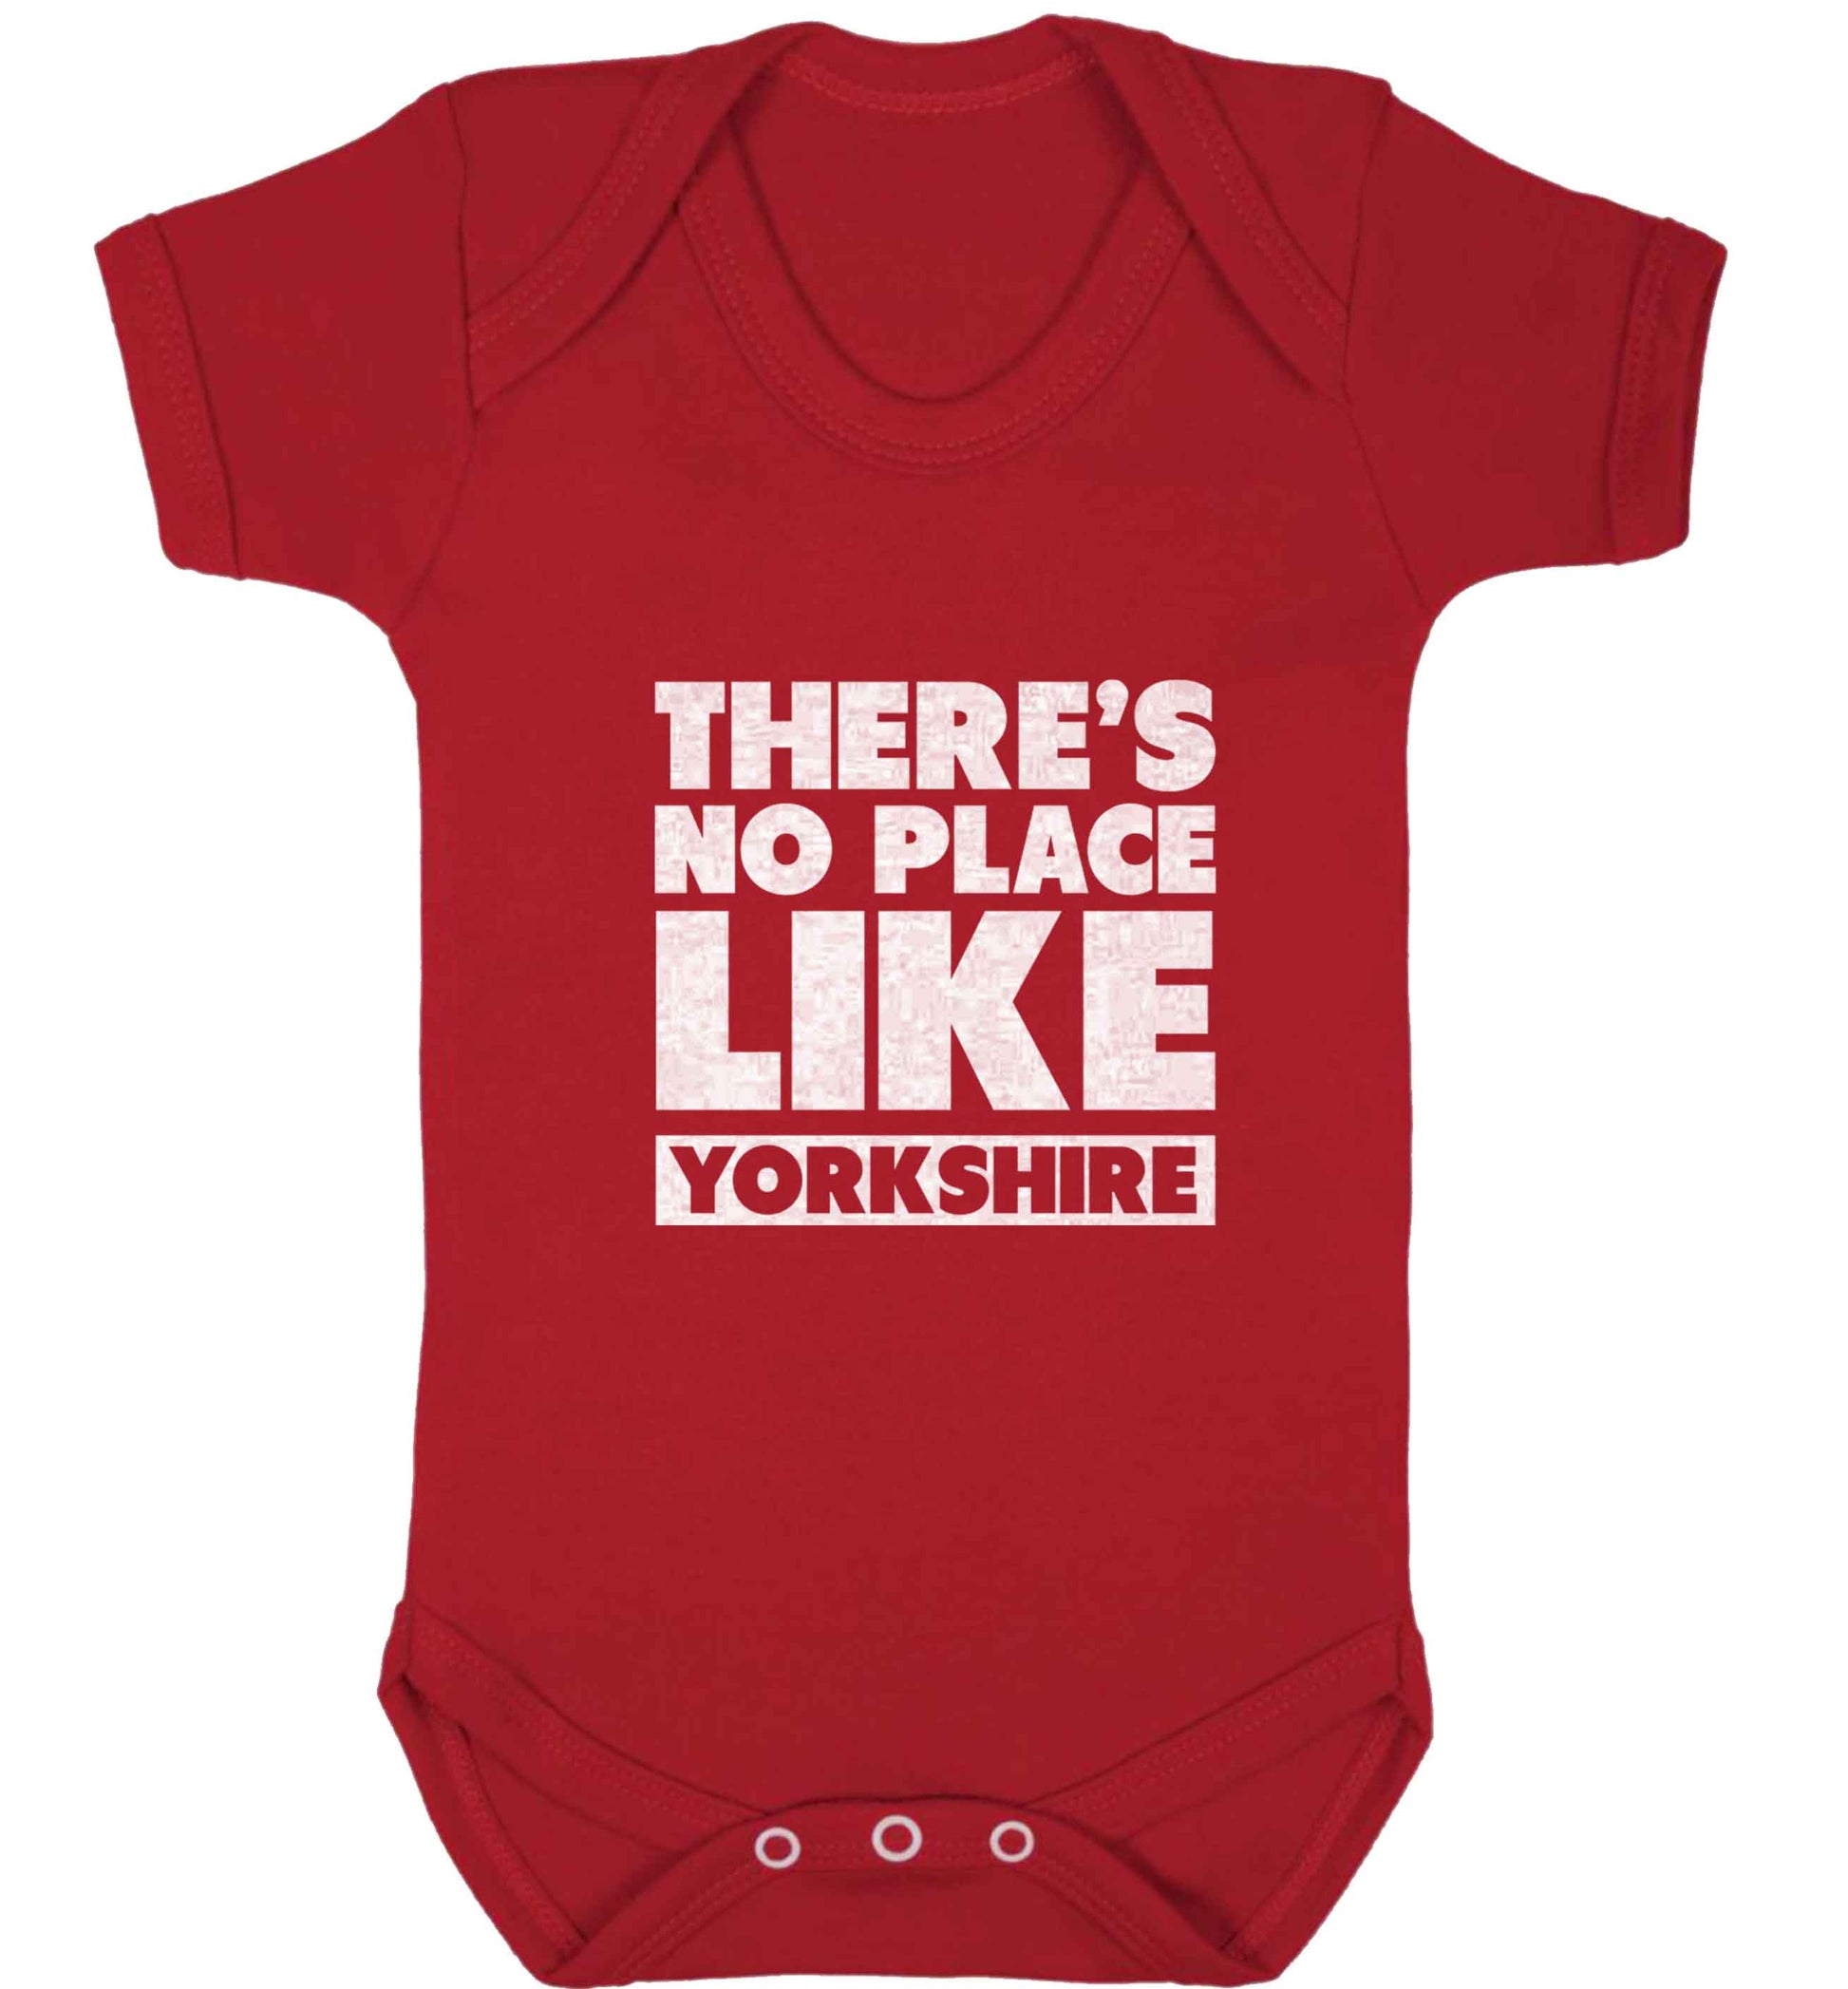 There's no place like Yorkshire baby vest red 18-24 months